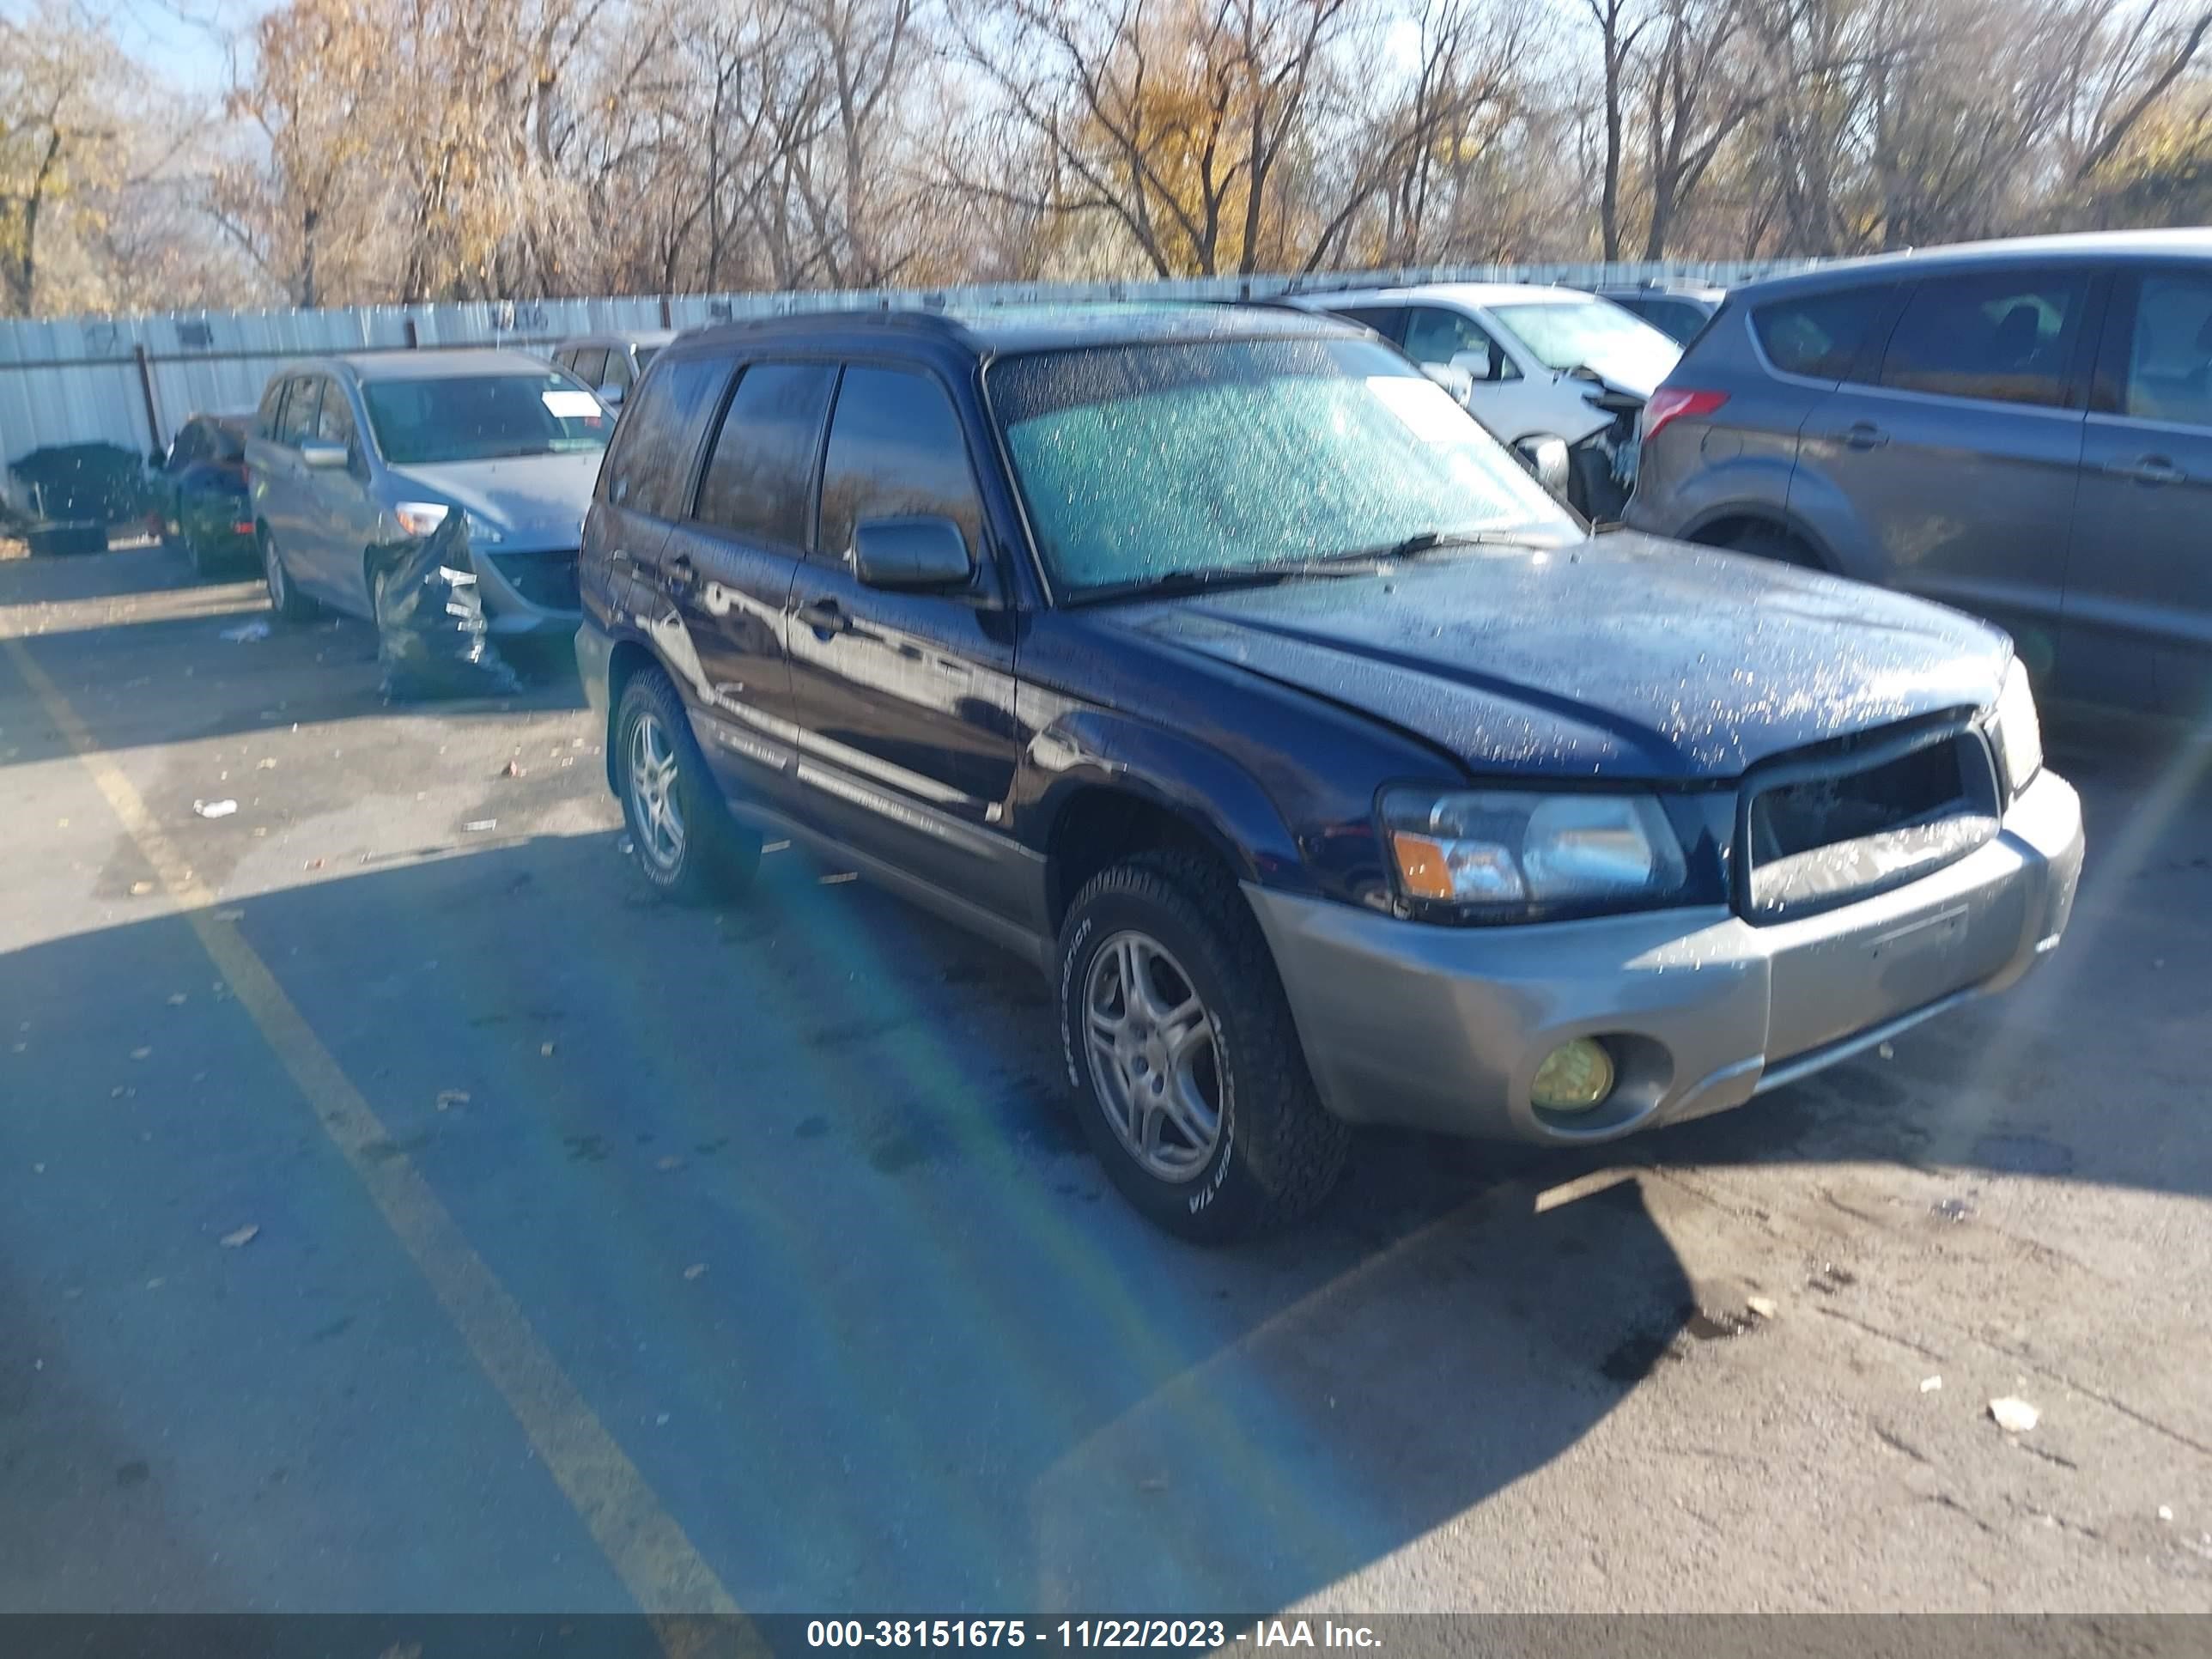 VIN: JF1SG67675H724719 - subaru forester